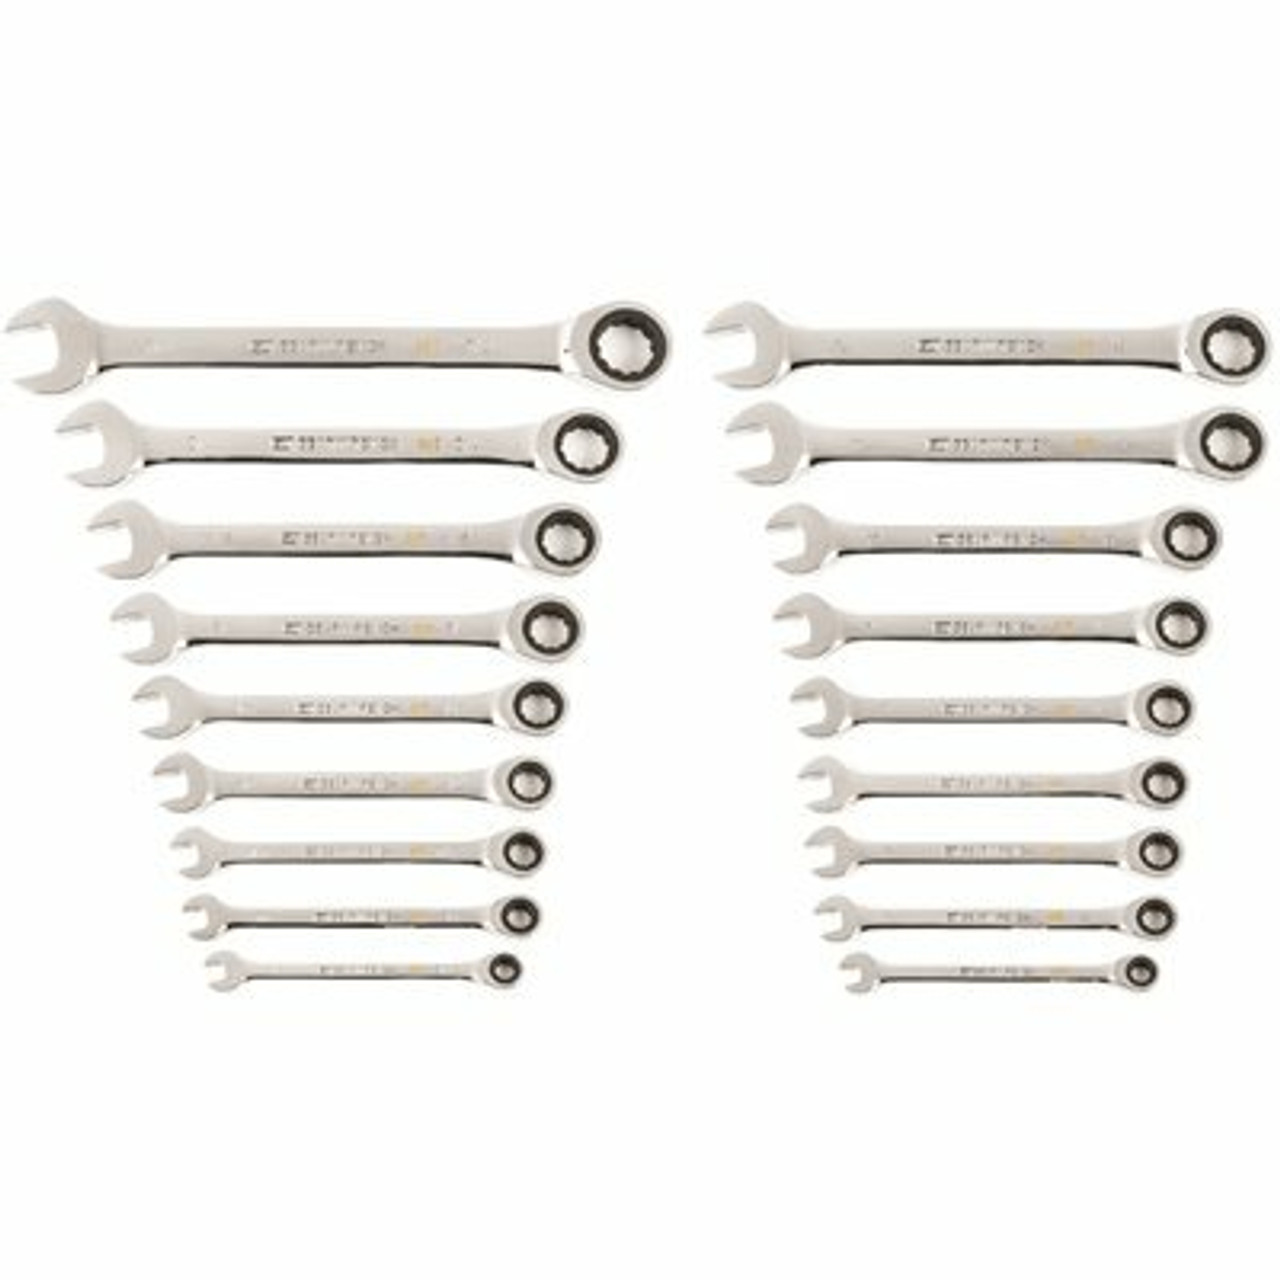 Gearwrench Sae/Mm 90-Tooth Pro Combination Ratcheting Wrench Tool Set With Tray (18-Piece)